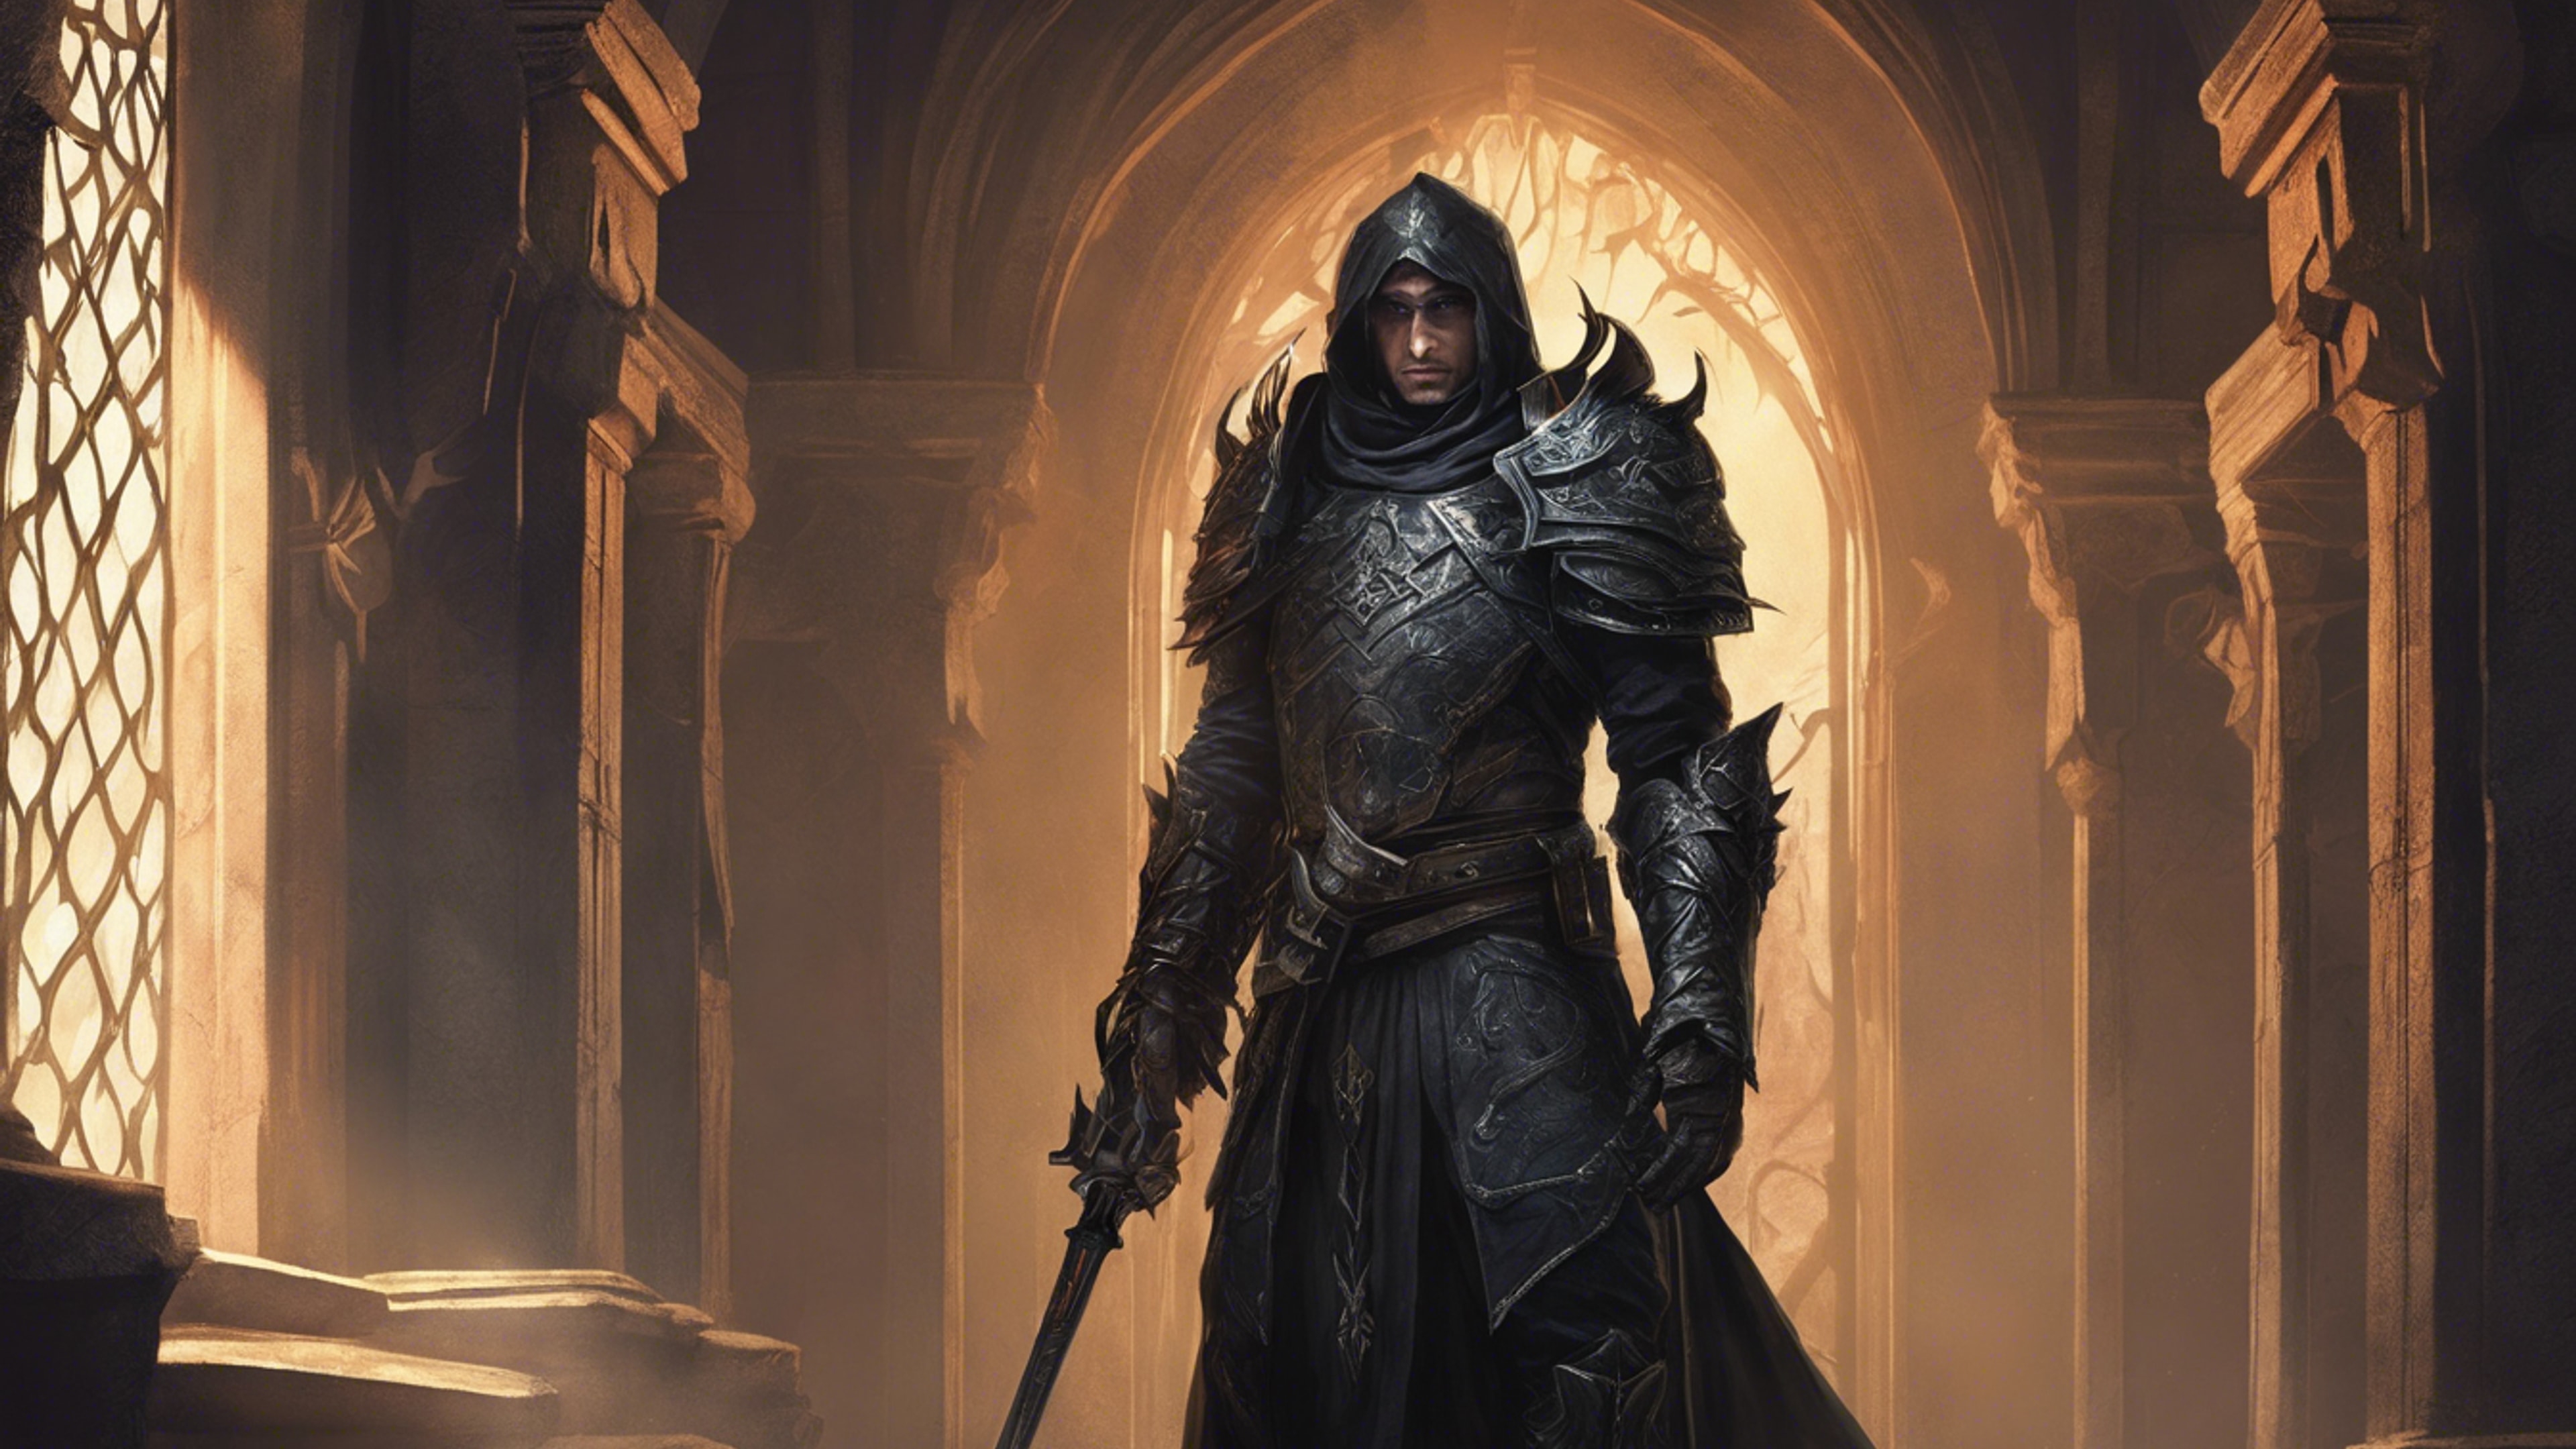 A gothic warrior clad in dark armor, standing in a torchlit corridor of a castle in a fantasy game. Wallpaper[b8dc712d0df045d5aea5]